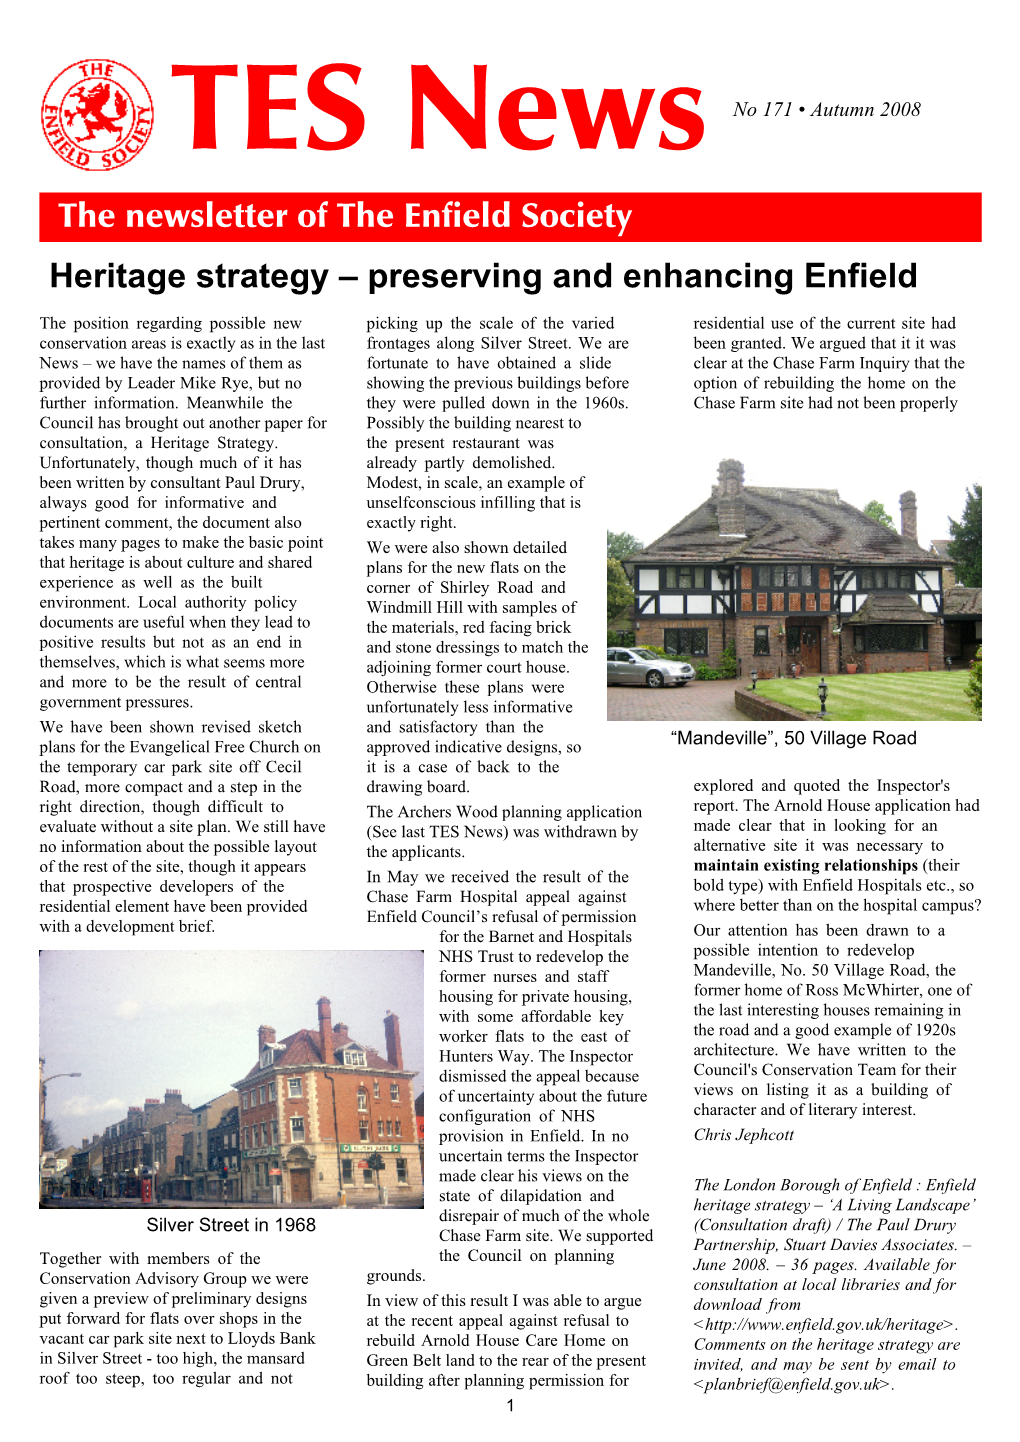 171 • Autumn 2008 the Newsletter of the Enfield Society Heritage Strategy – Preserving and Enhancing Enfield